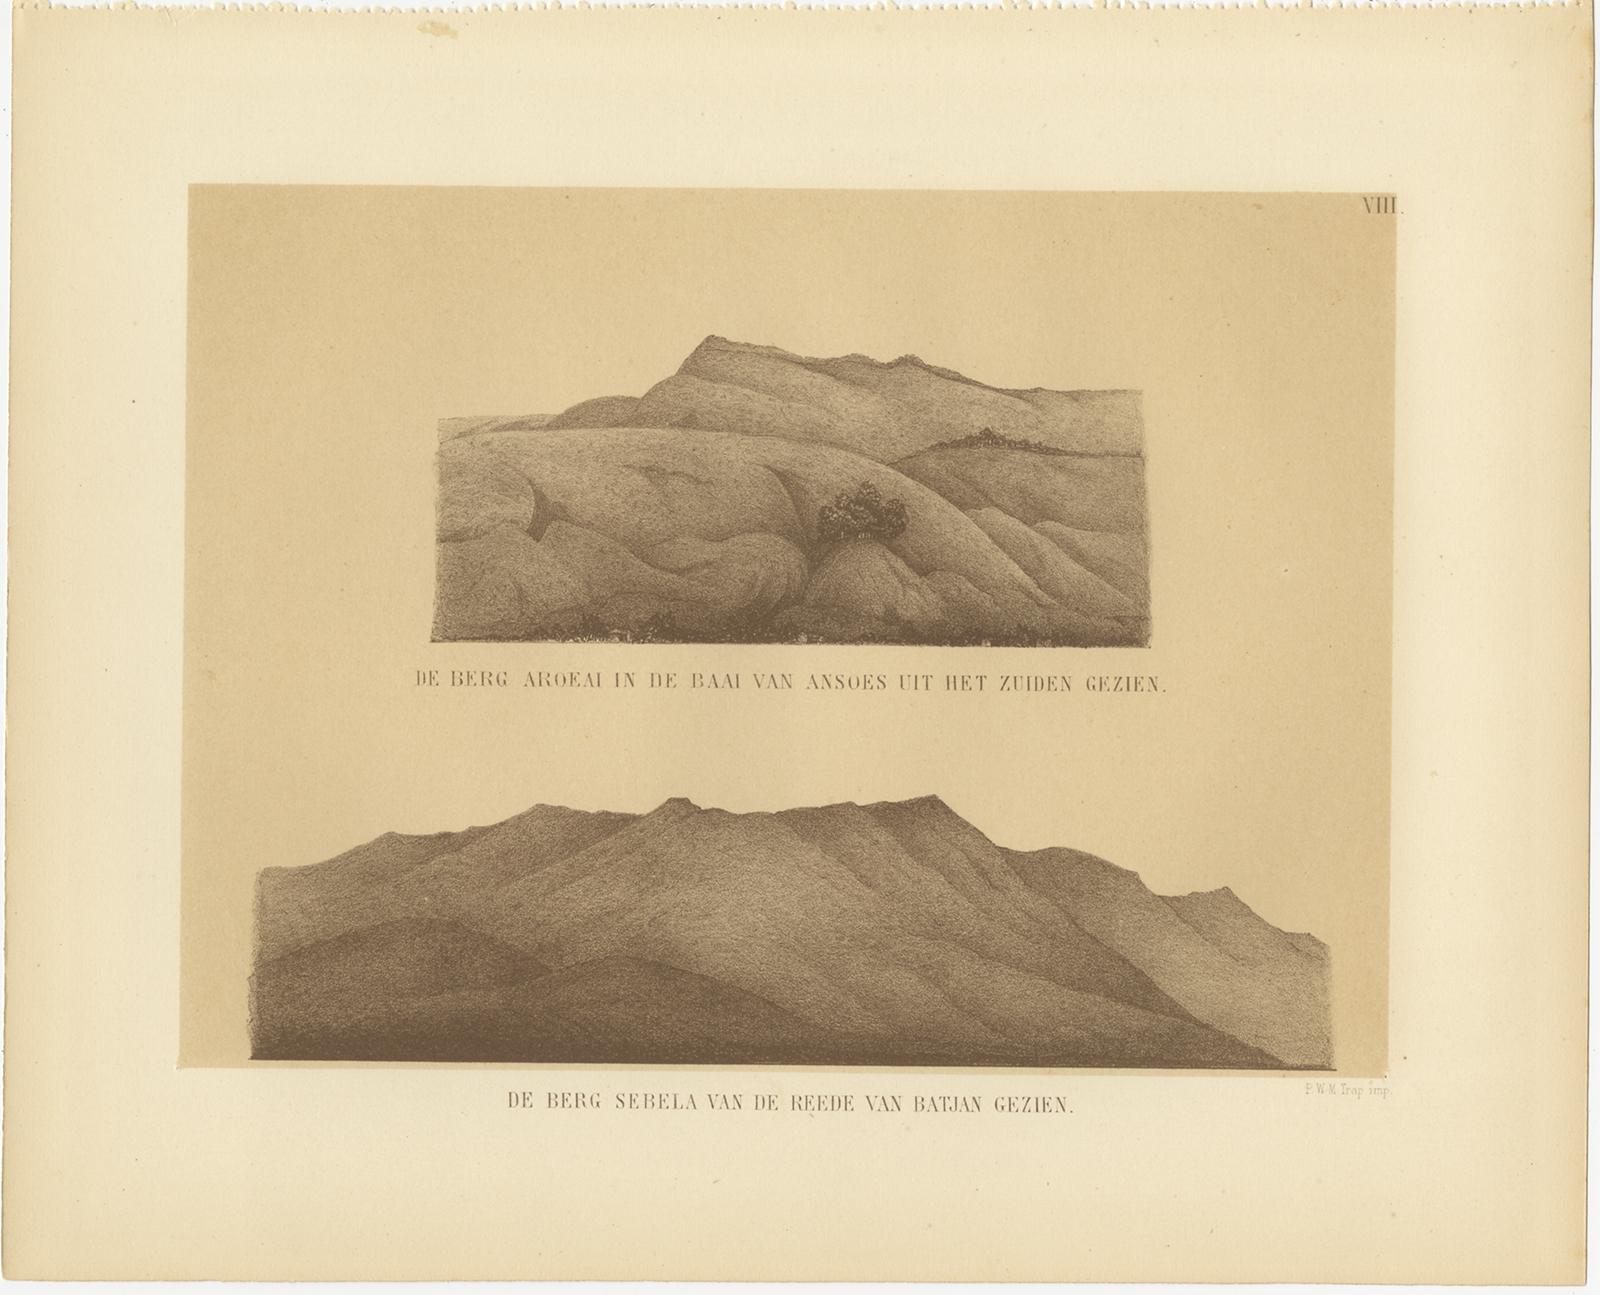 Set of 21 Antique Prints Illustrating the Travels to Cenderawasih Bay, 1875 For Sale 4